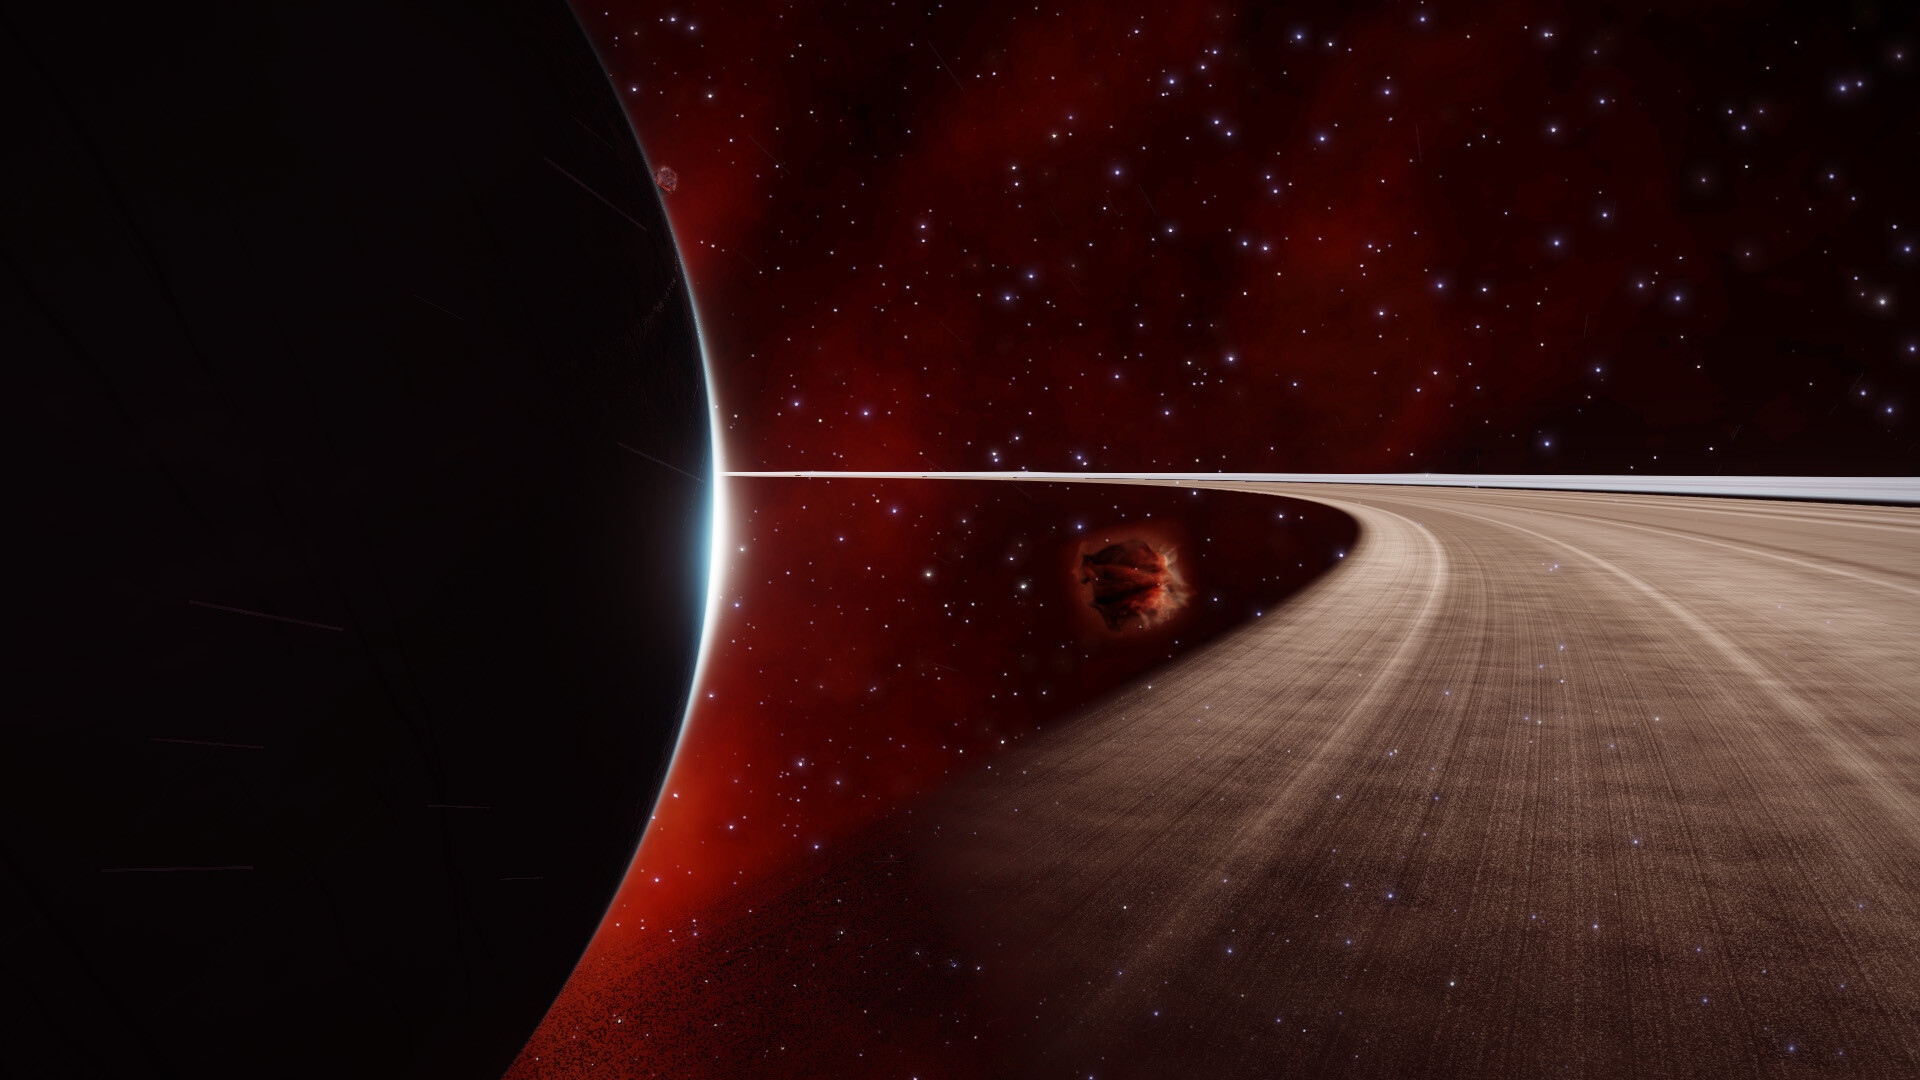 Rings in the Red Nebula